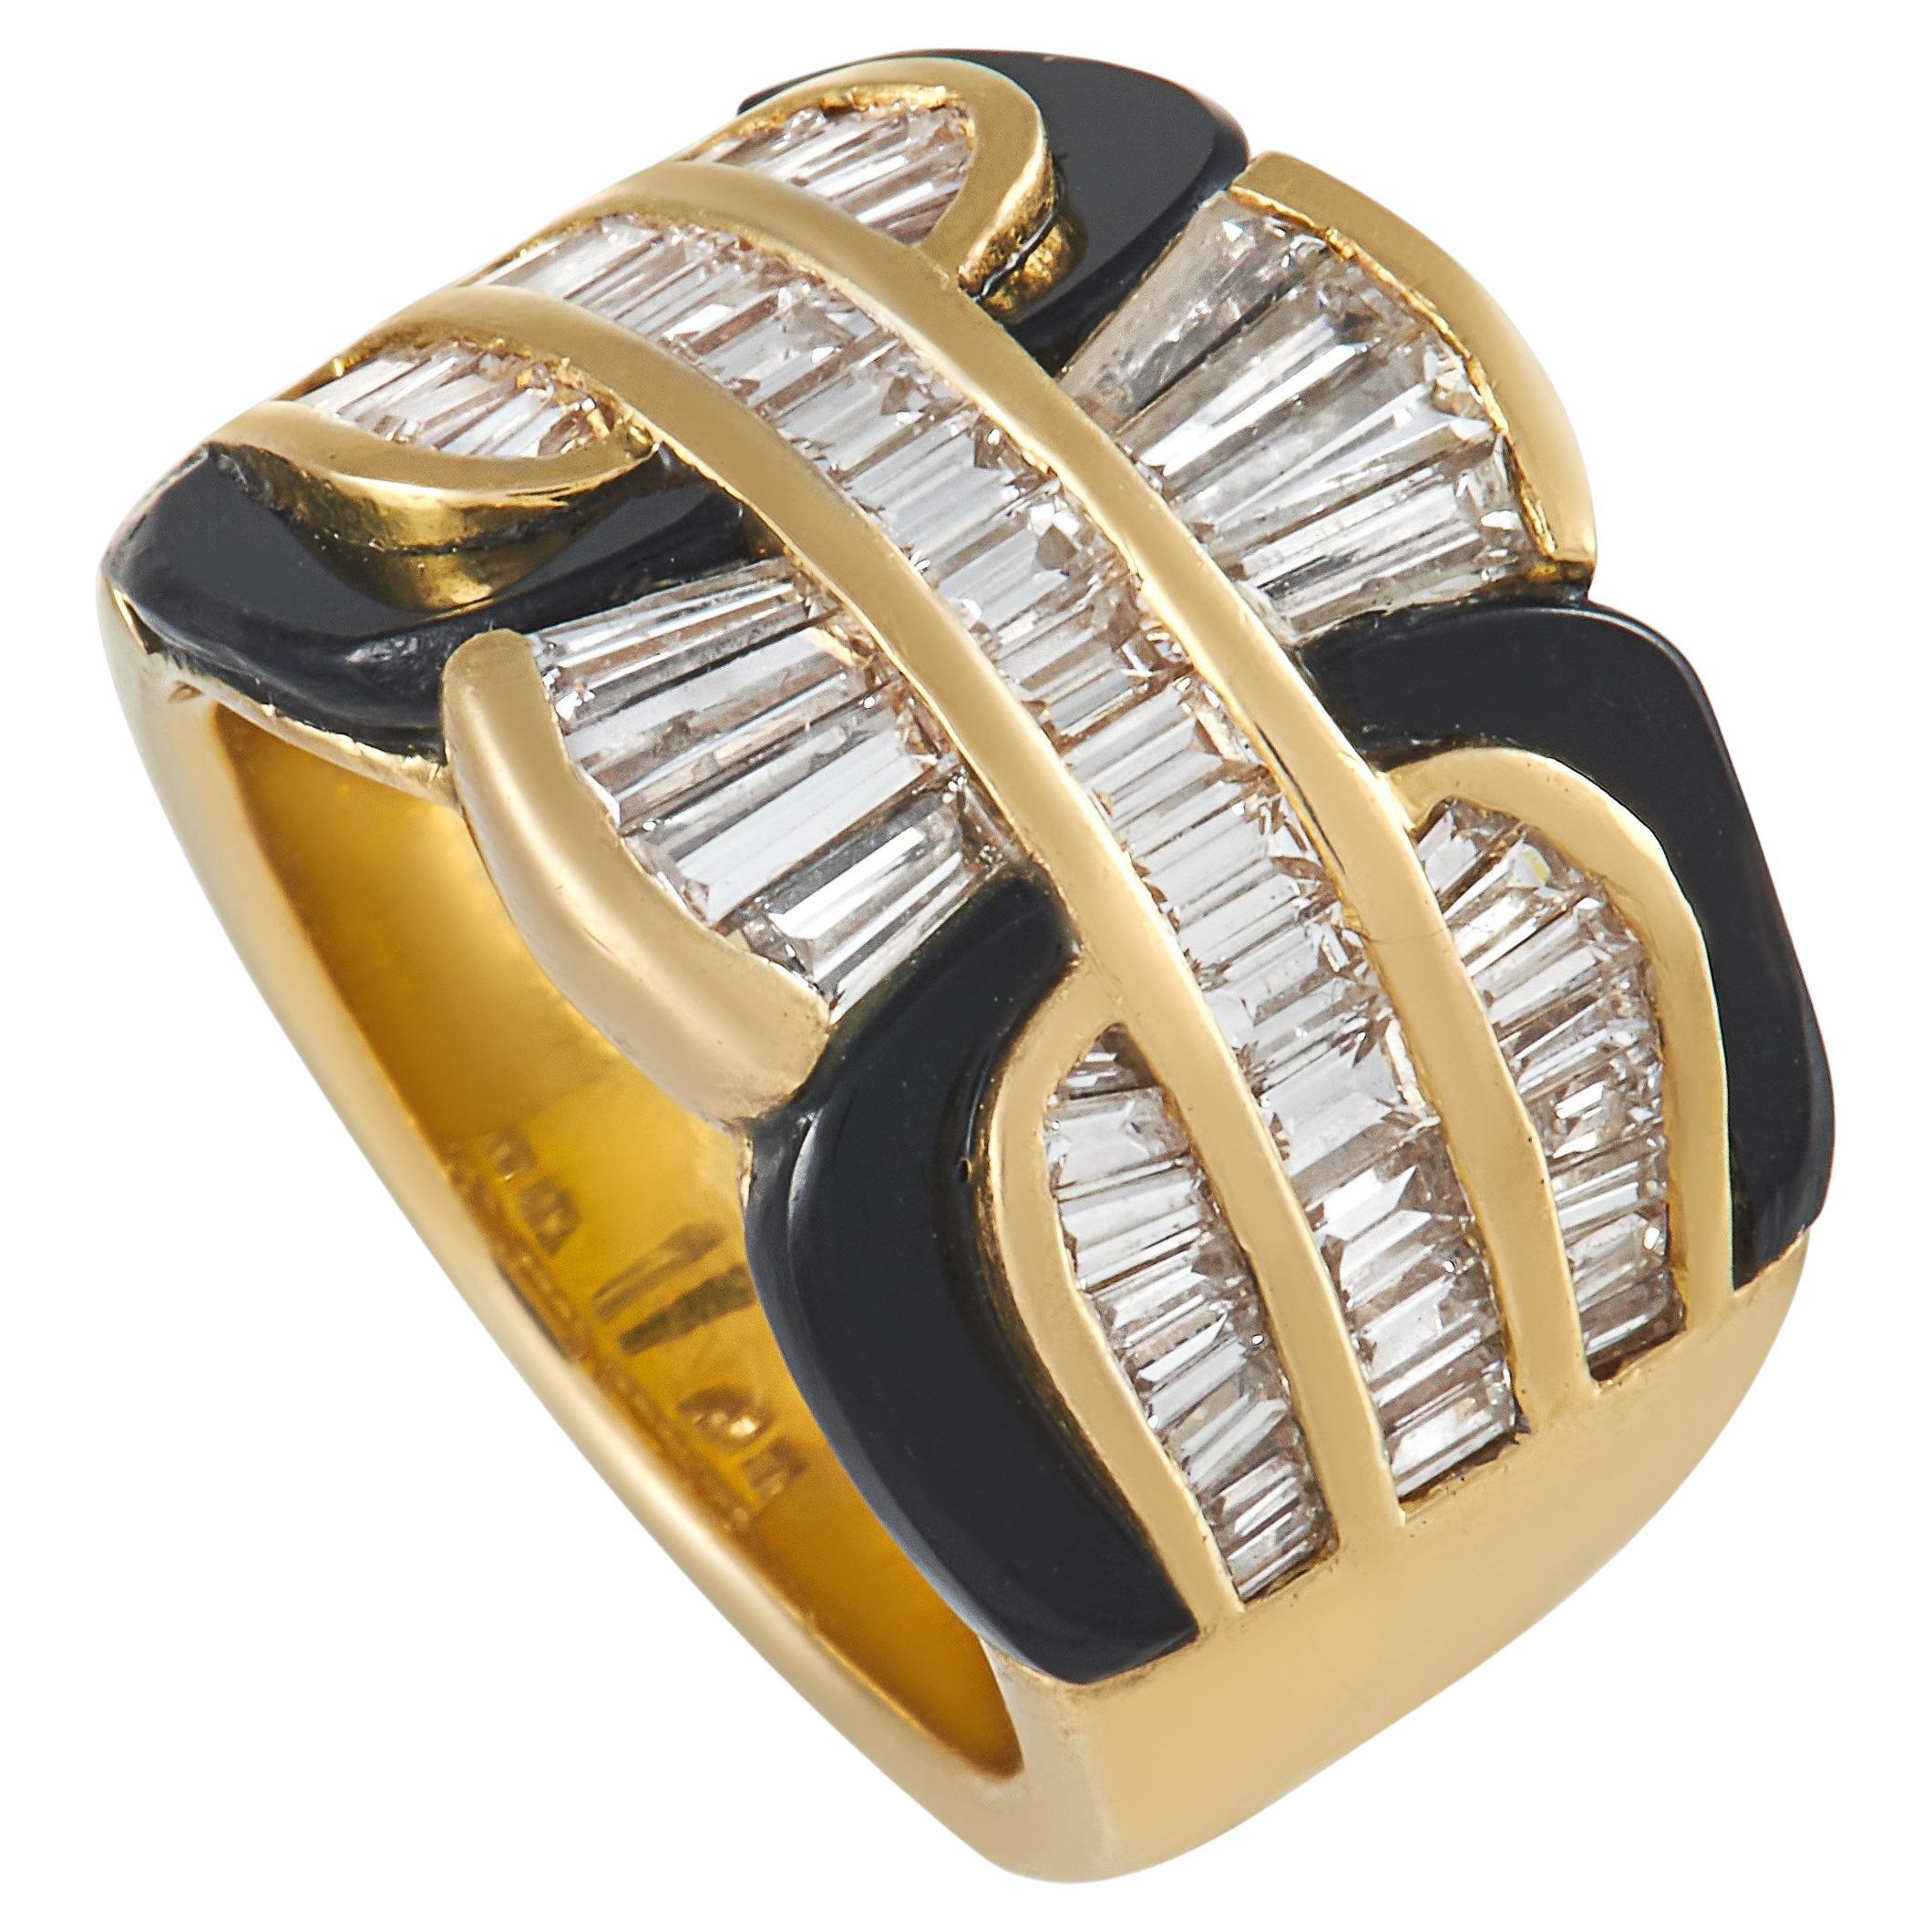 Damiani 18K Yellow Gold 2.38 Ct Diamond and Onyx Ring For Sale